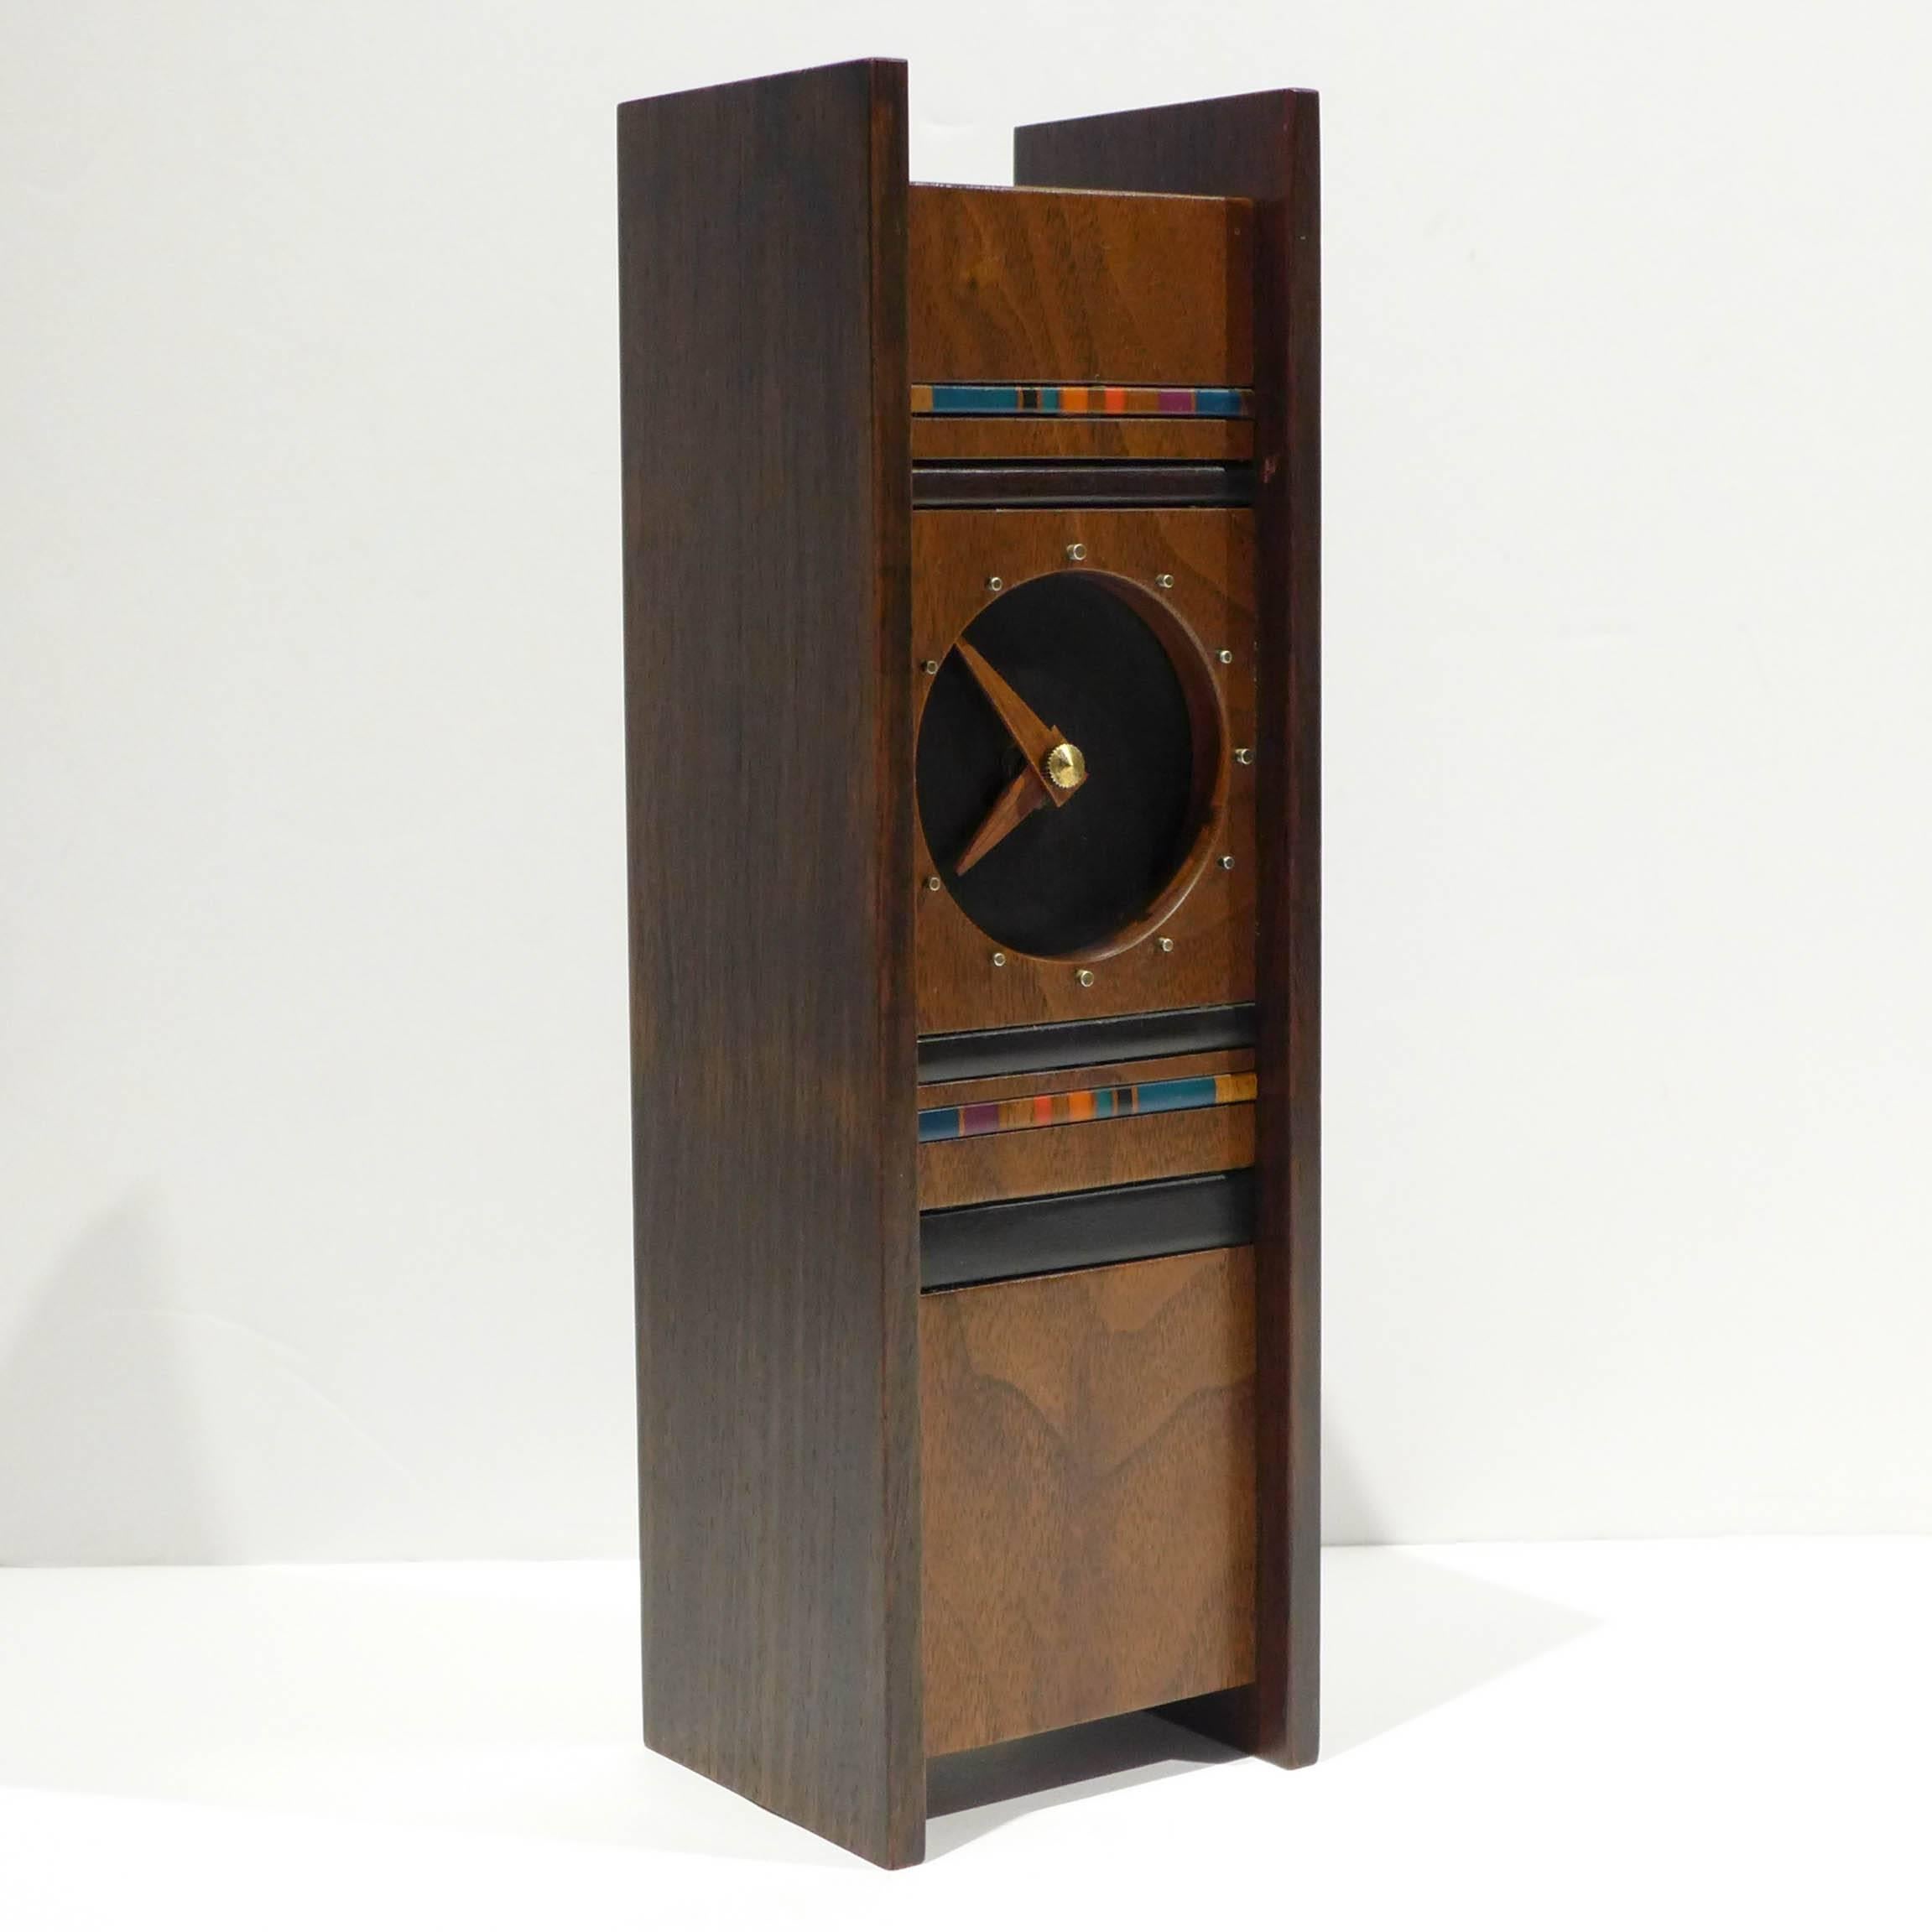 Seldom-seen table clock by San Francisco Bay artisan Robert McKeown (1931-1989). A graduate of the California College of Arts and Crafts, McKeown was a color theorist and woodworker who won acclaim for his innovative resin inlays on a range of